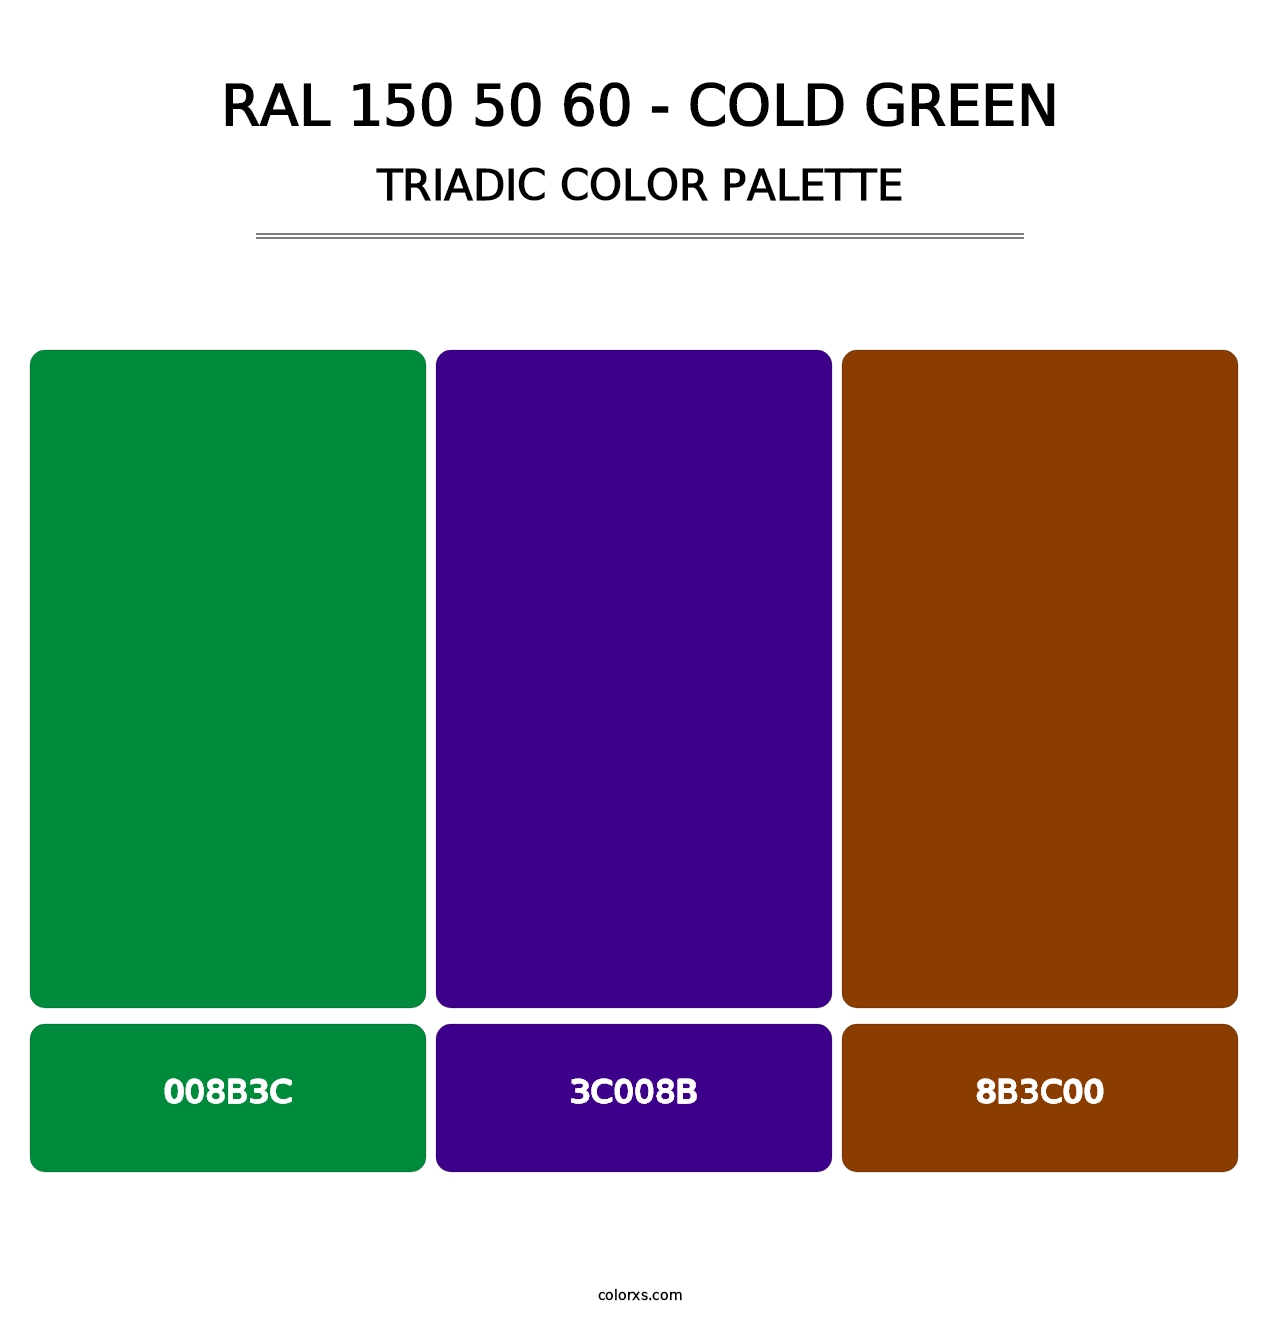 RAL 150 50 60 - Cold Green - Triadic Color Palette